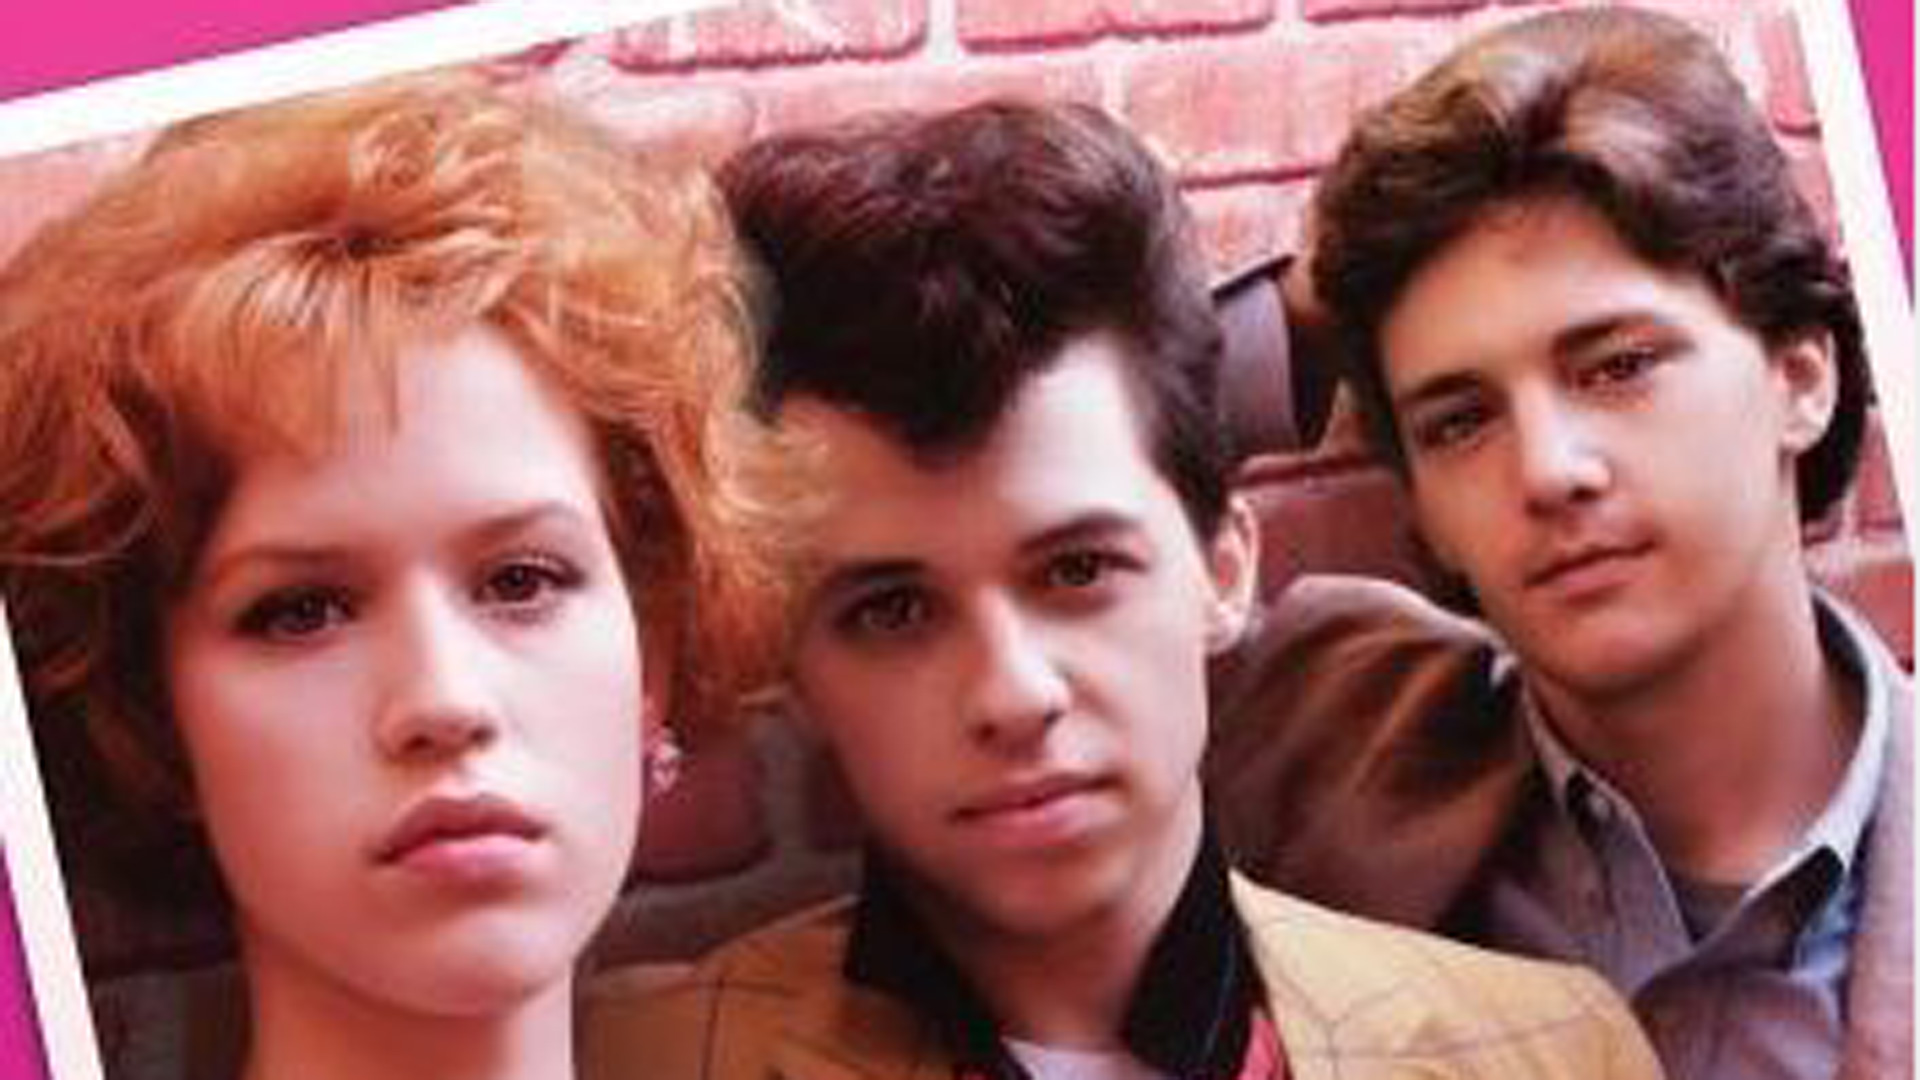 11 facts you didn't know about Pretty in Pink